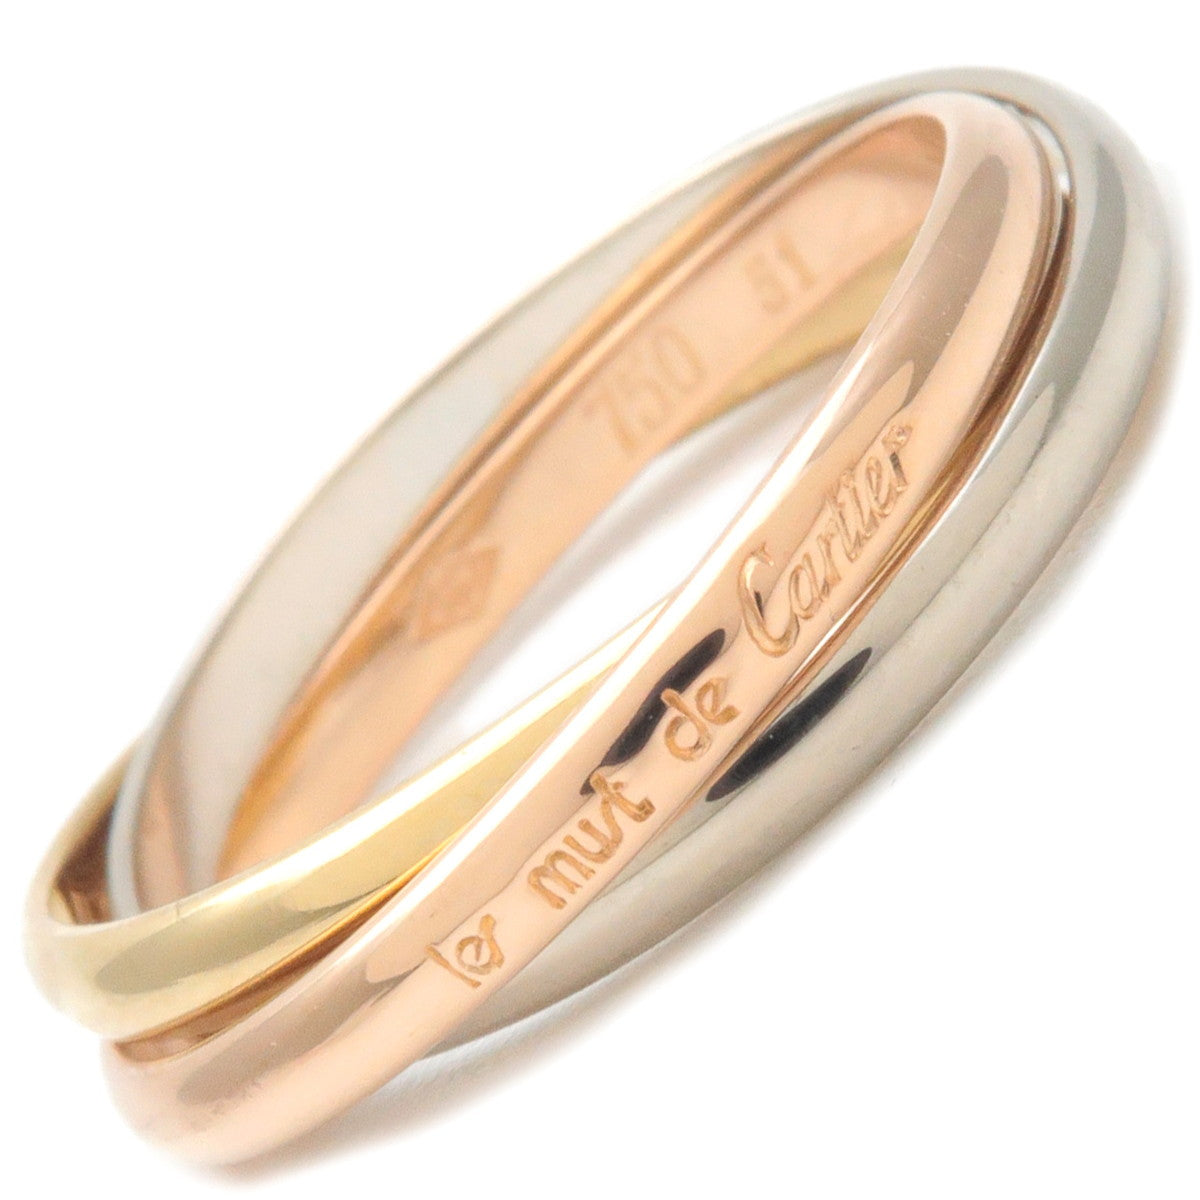 Cartier-Trinity-Ring-K18-750-Yellow-Gold-White-Gold-Pink-Gold-#51